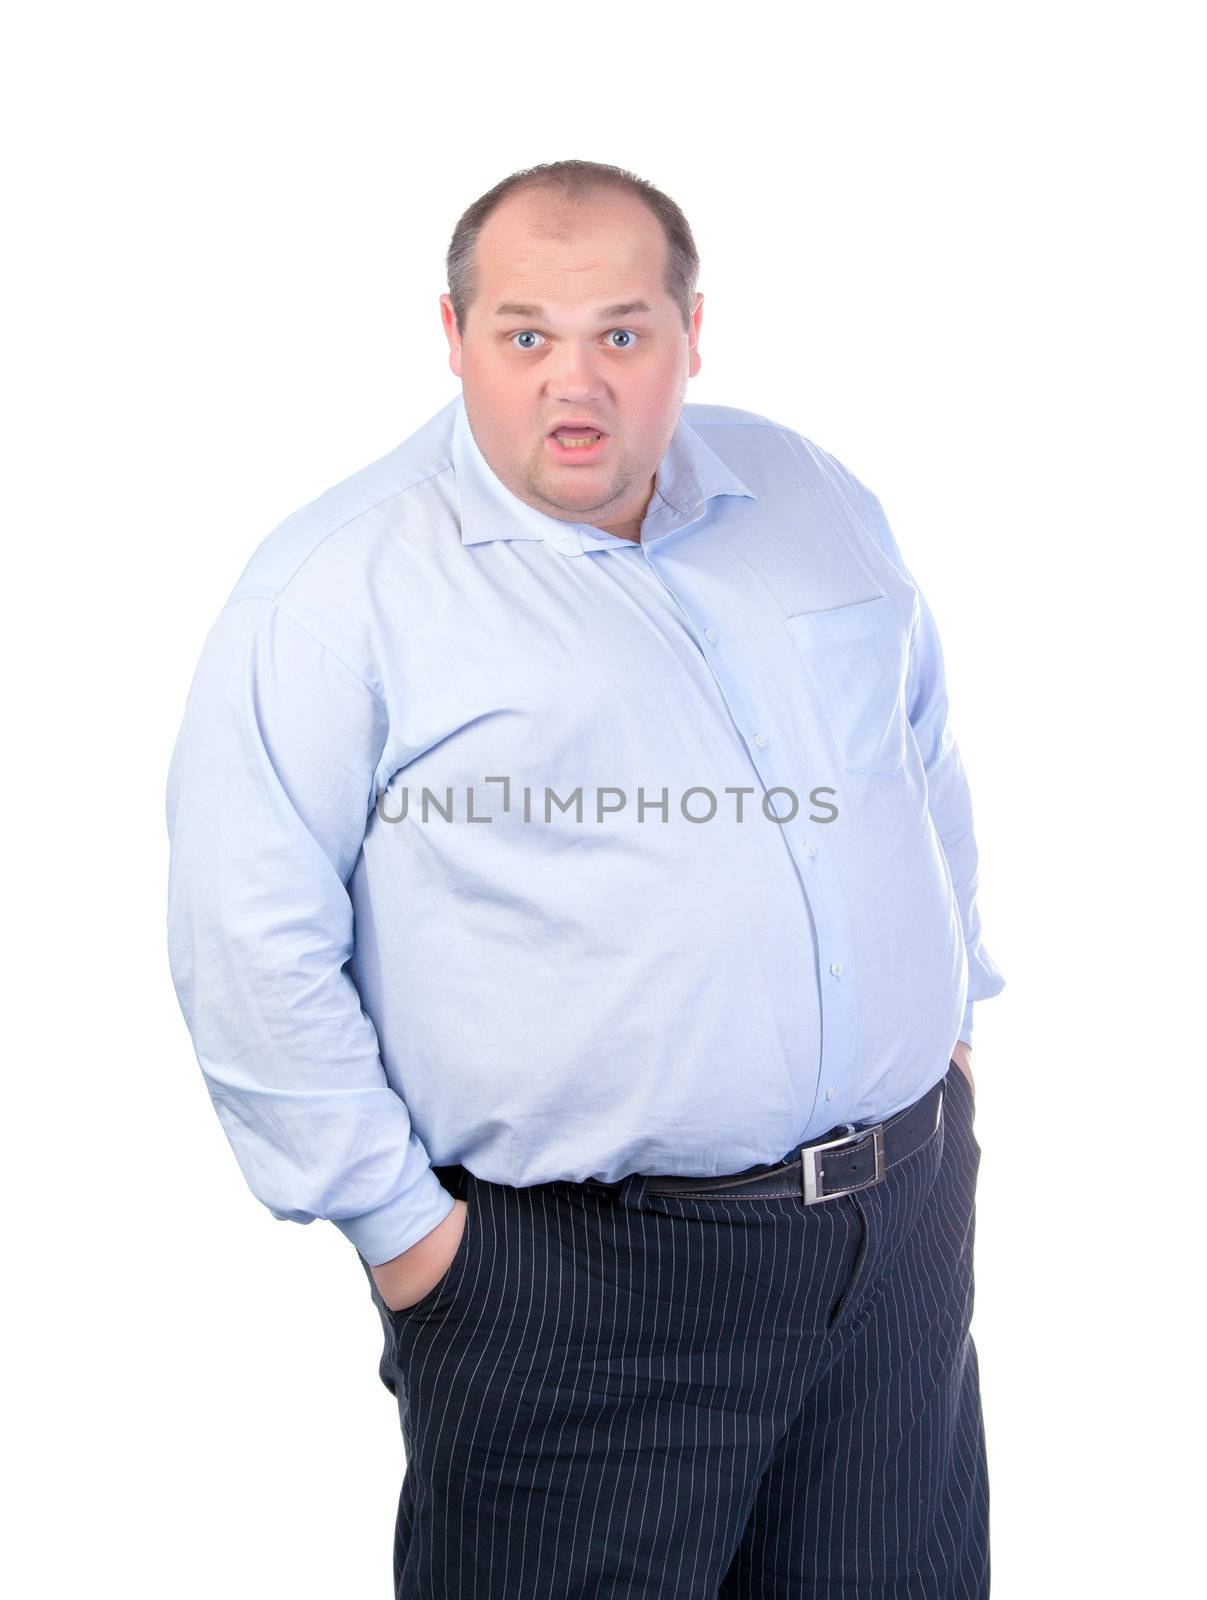 Fat Man in a Blue Shirt, Contorts Antics, isolated